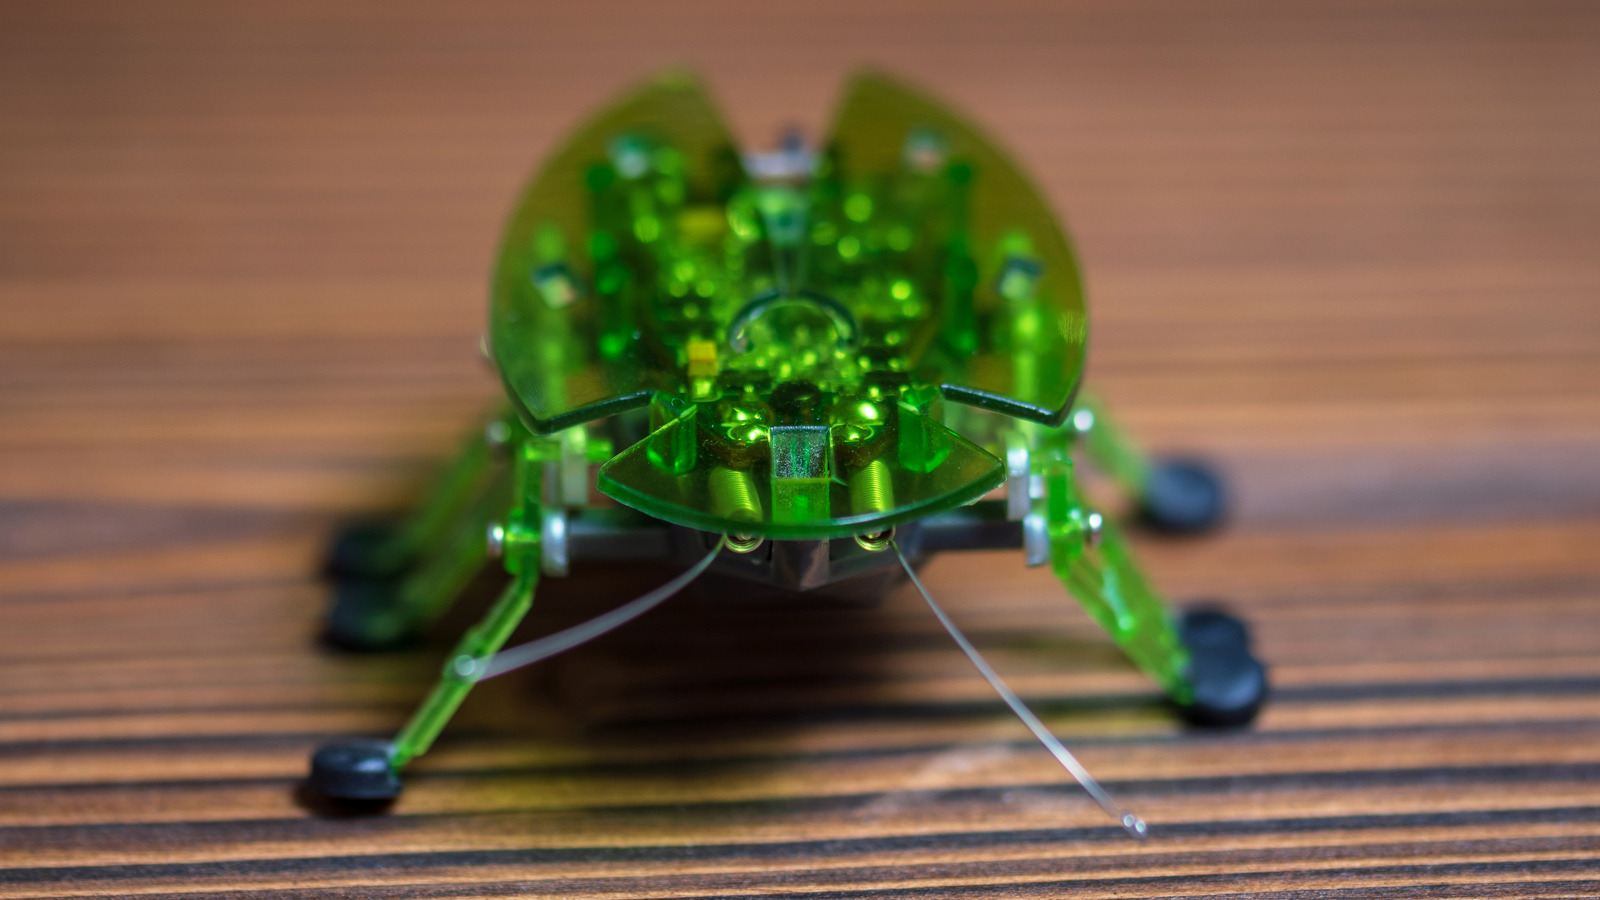 Are Robotic bugs the next big breakthrough in medical technology?